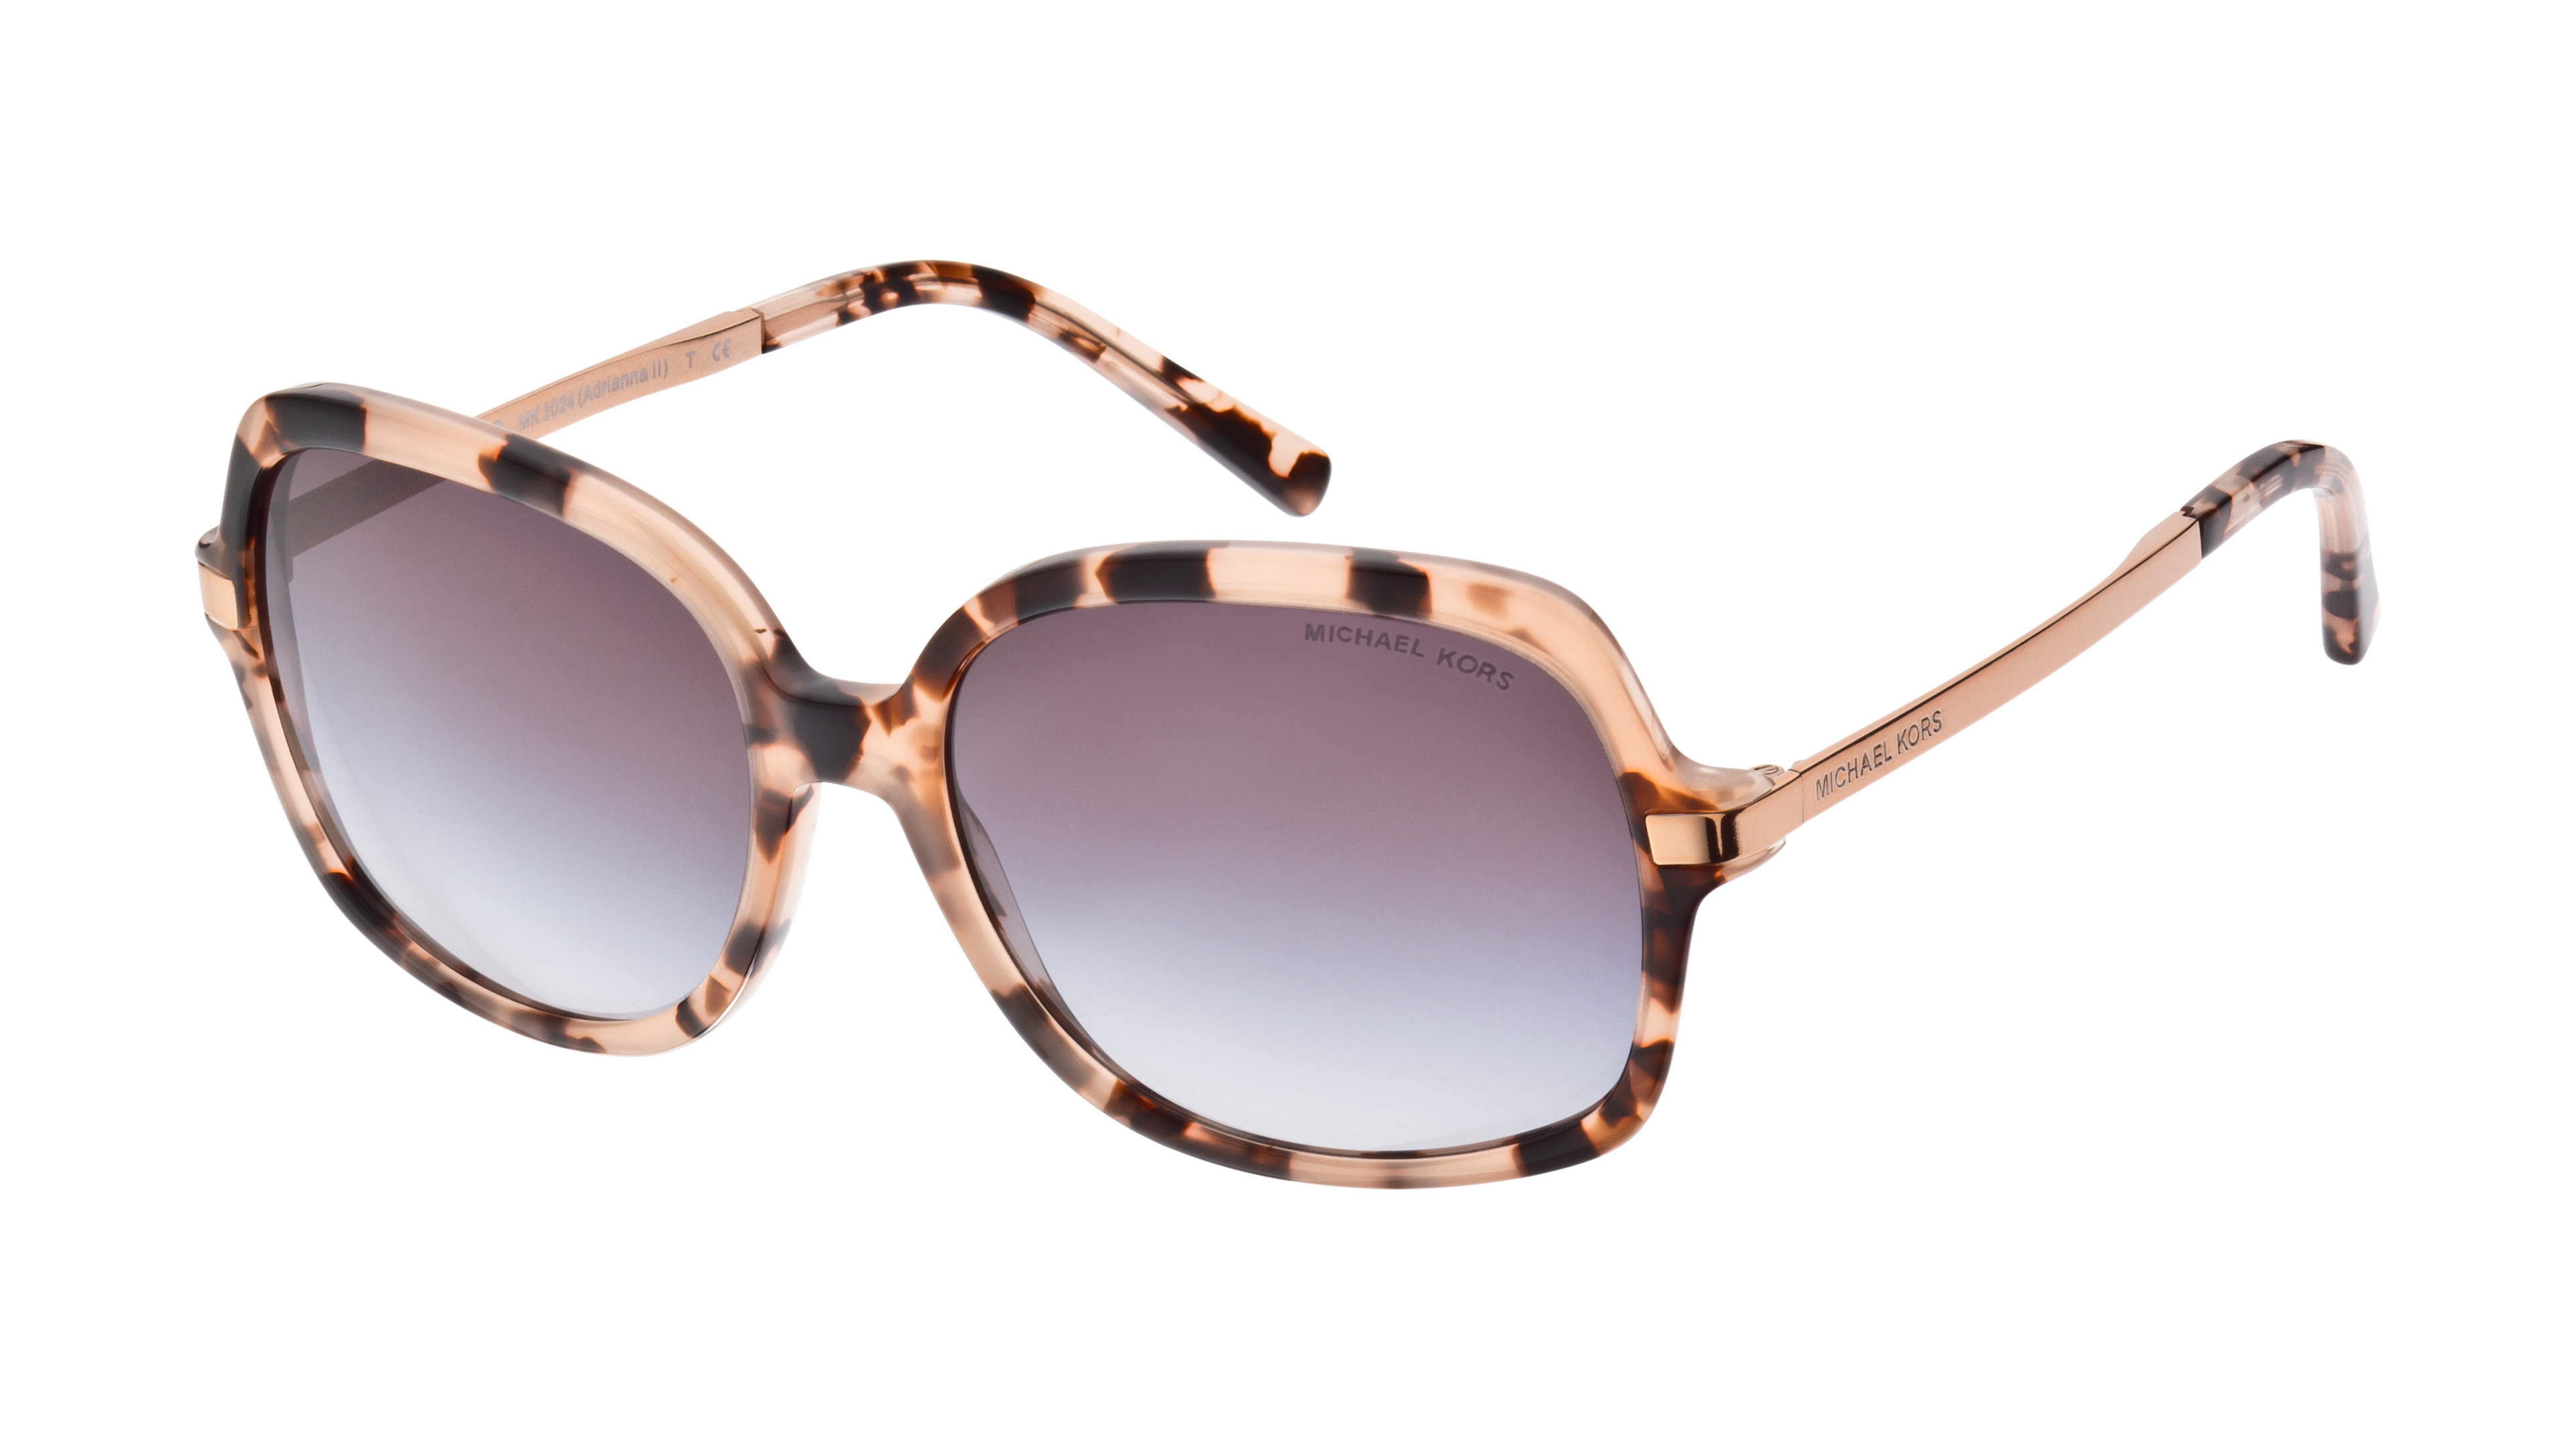 [products.image.angle_left01] Michael Kors ADRIANNA II 0MK2024 316213 Sonnenbrille